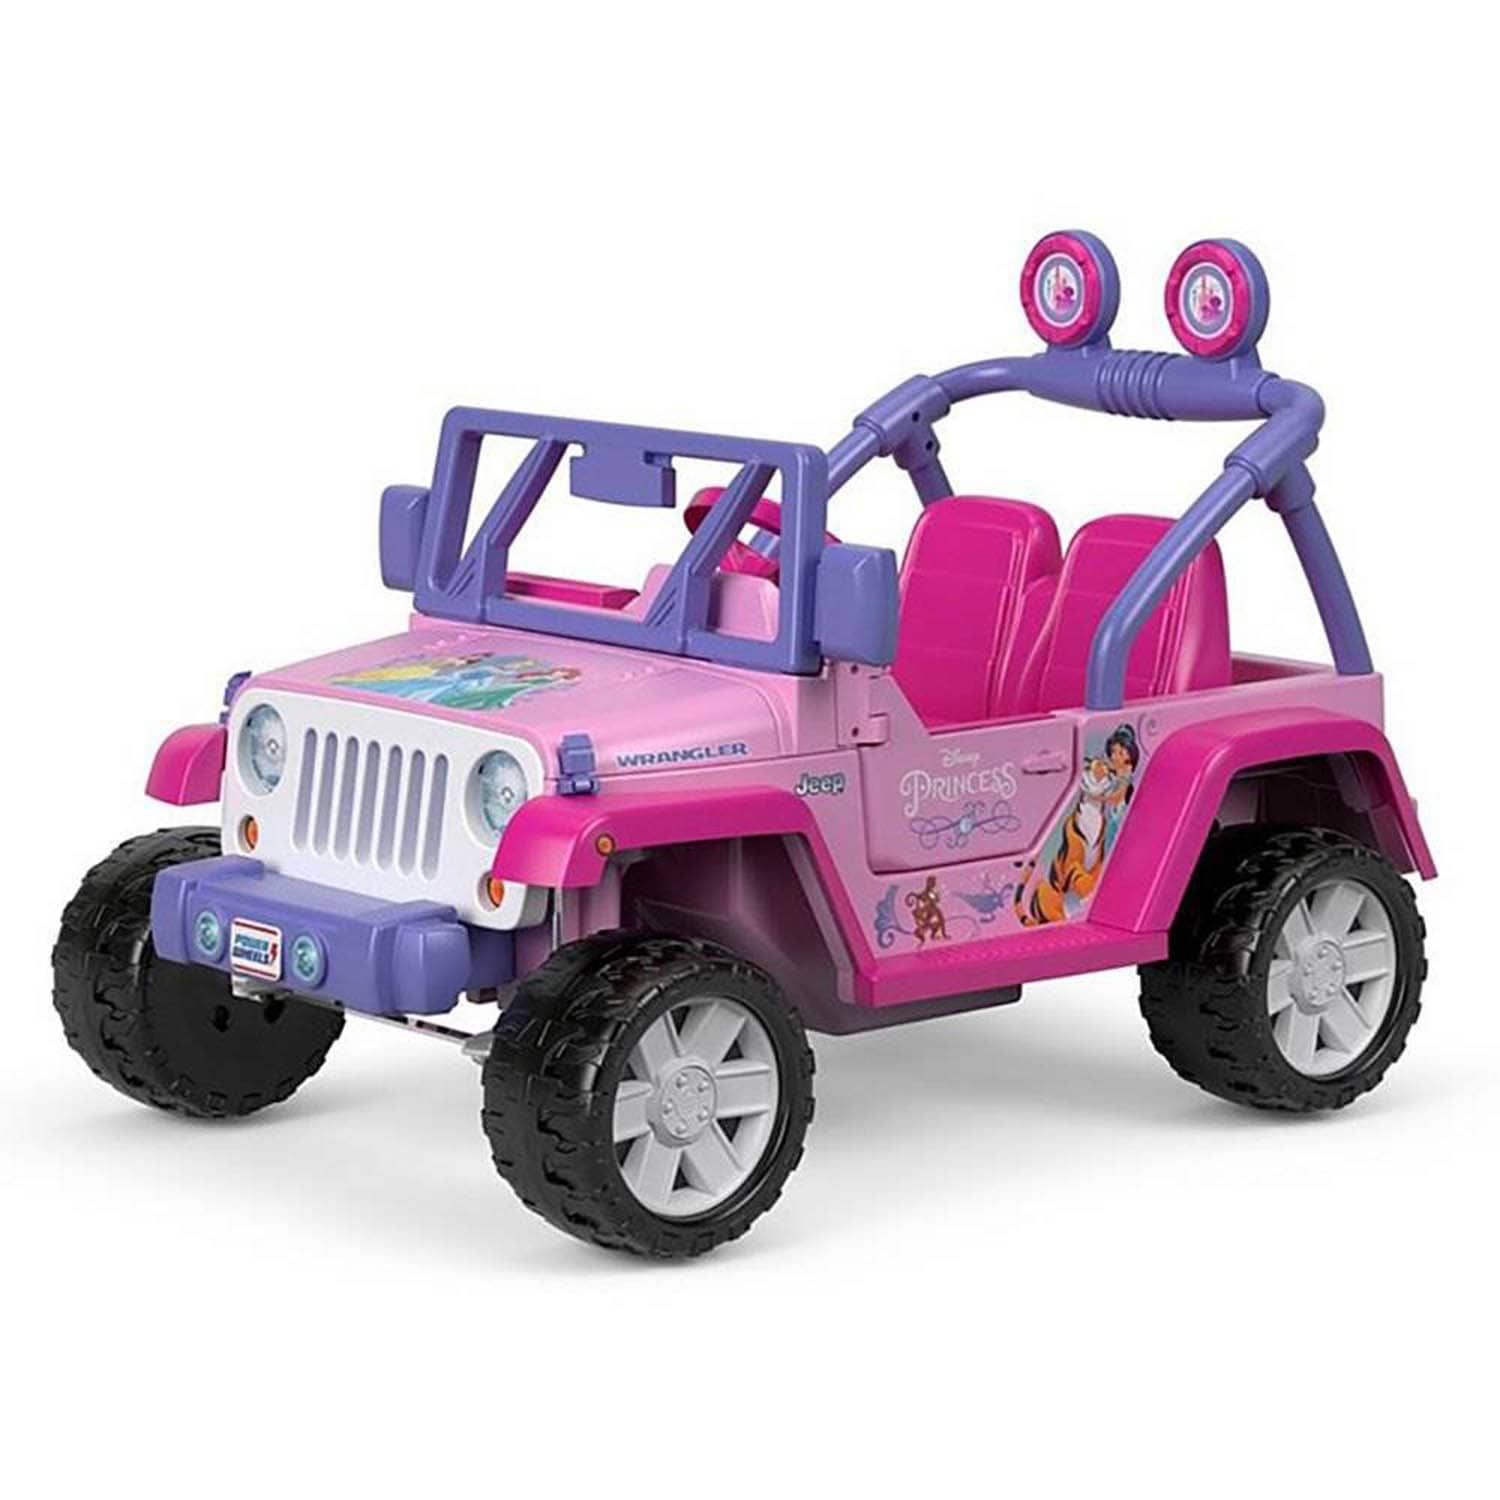 POWER WHEELS 12-volt Riding Toys (Battery & Charger Included) in